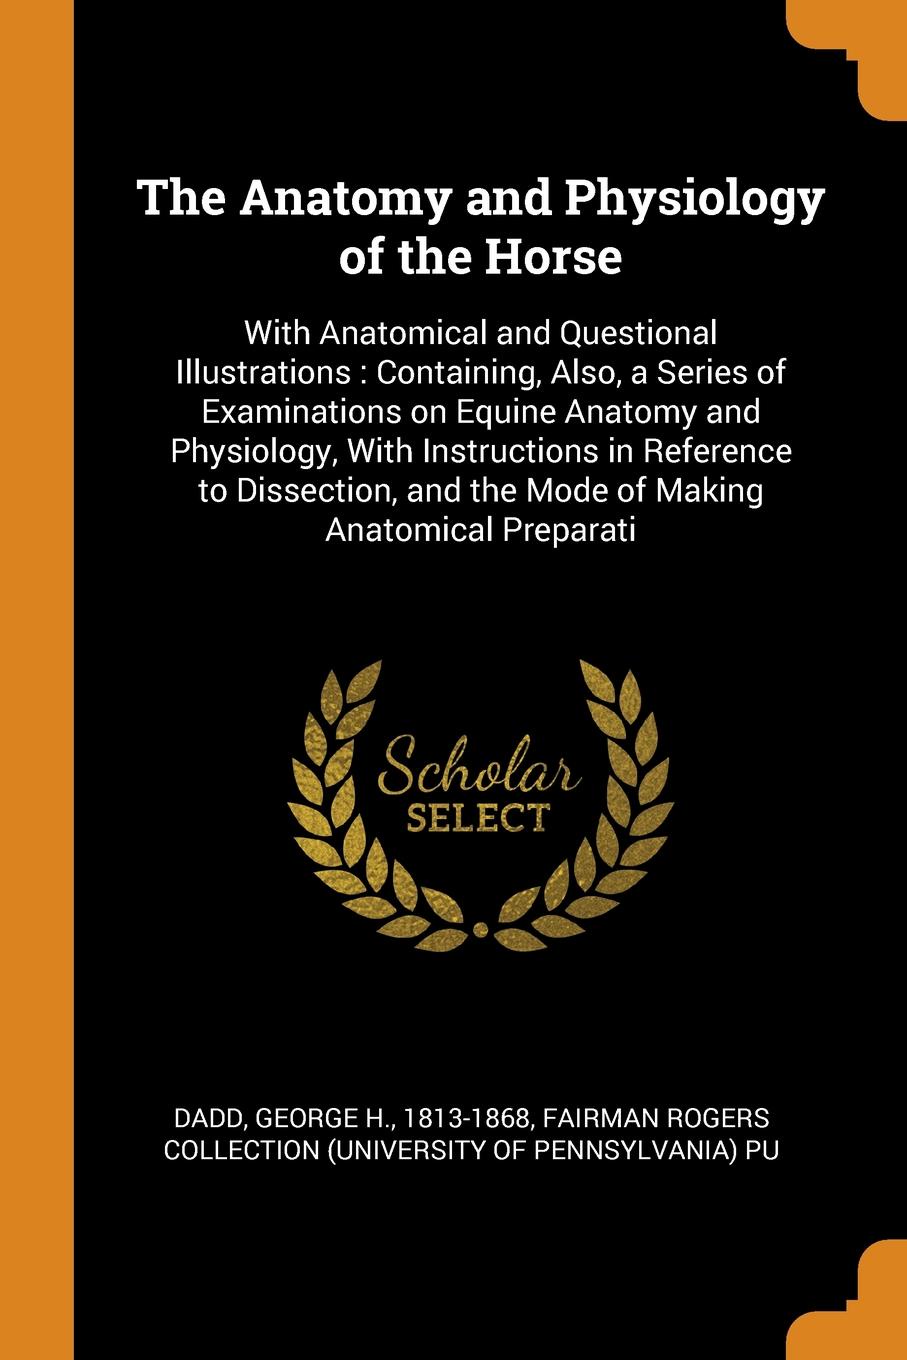 The Anatomy and Physiology of the Horse. With Anatomical and Questional Illustrations : Containing, Also, a Series of Examinations on Equine Anatomy and Physiology, With Instructions in Reference to Dissection, and the Mode of Making Anatomical Pr...